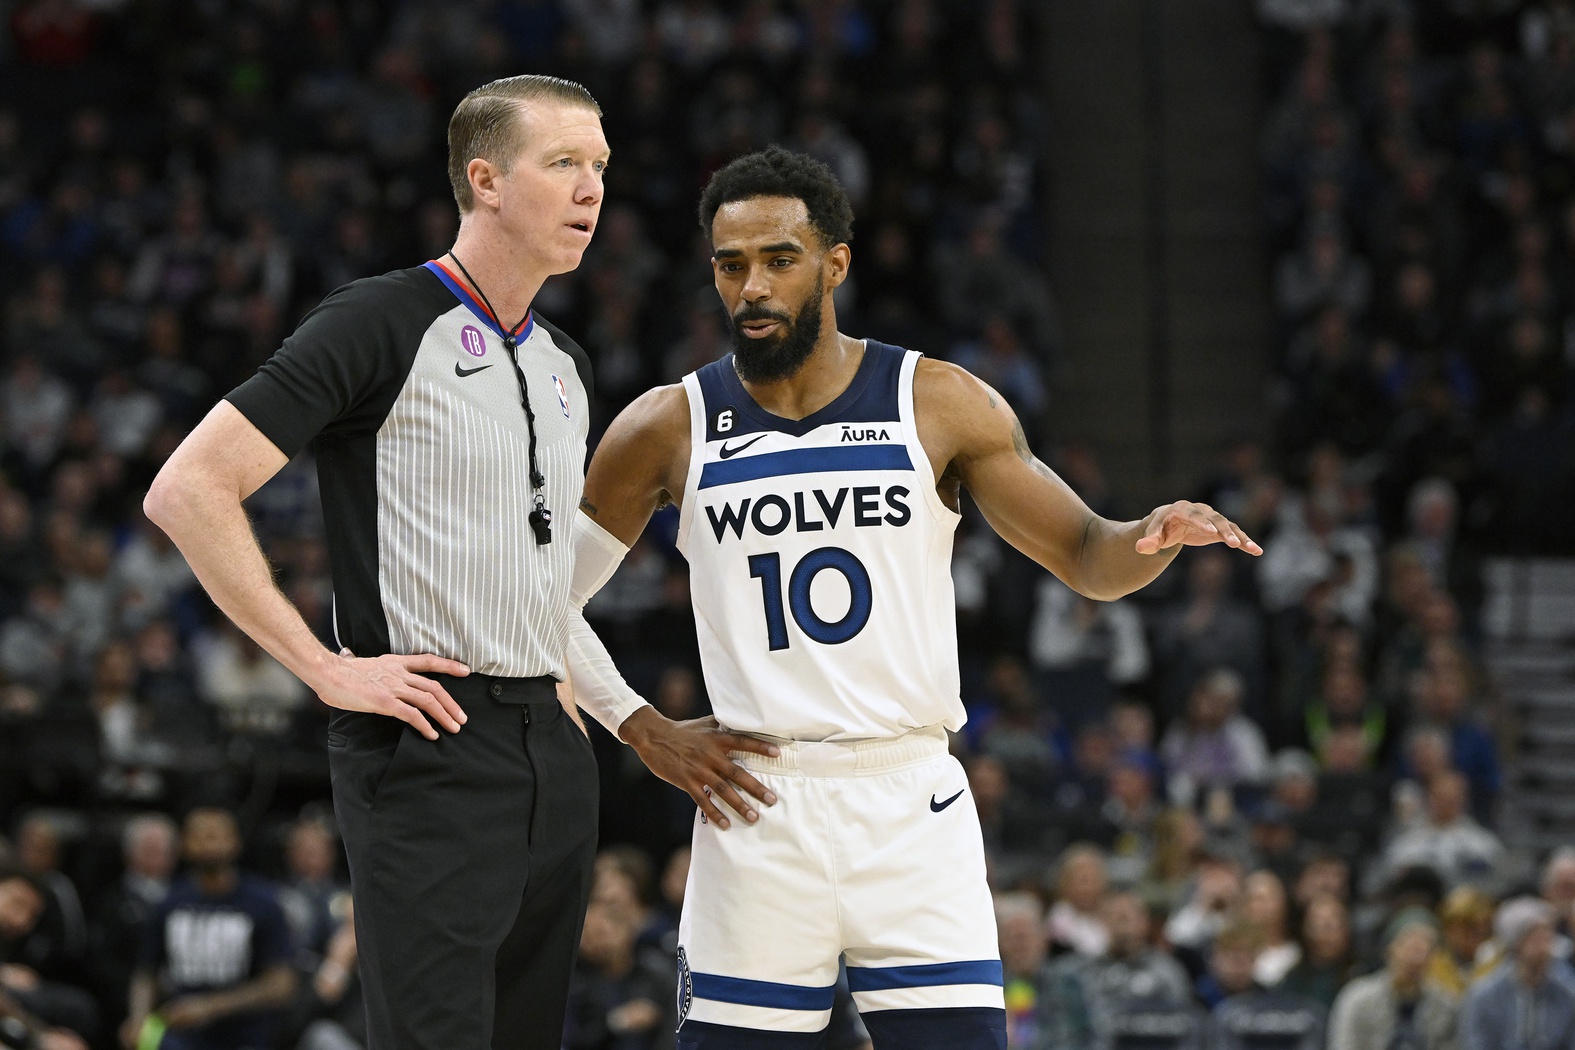 Feb 16, 2023; Minneapolis, Minnesota, USA; Minnesota Timberwolves guard Mike Conley (10) chats with referee Ed Malloy (14) during the fourth quarter of a game against the Washington Wizards at Target Center. Mandatory Credit: Nick Wosika-USA TODAY Sports